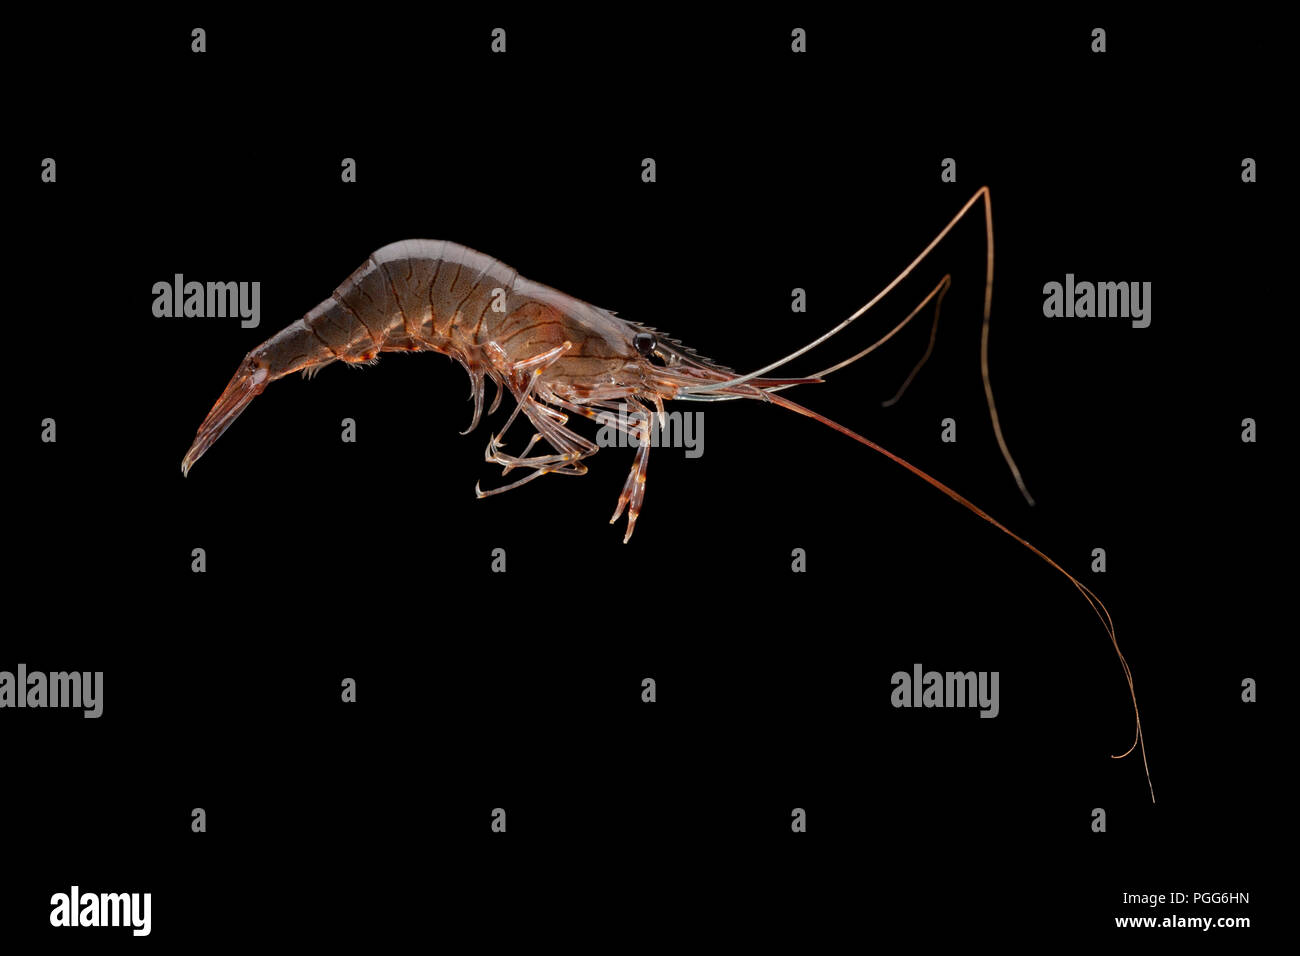 A fresh, uncooked common prawn, Palaemon serratus, that has been caught in a prawn trap and photographed on a black background. Dorset England UK GB Stock Photo